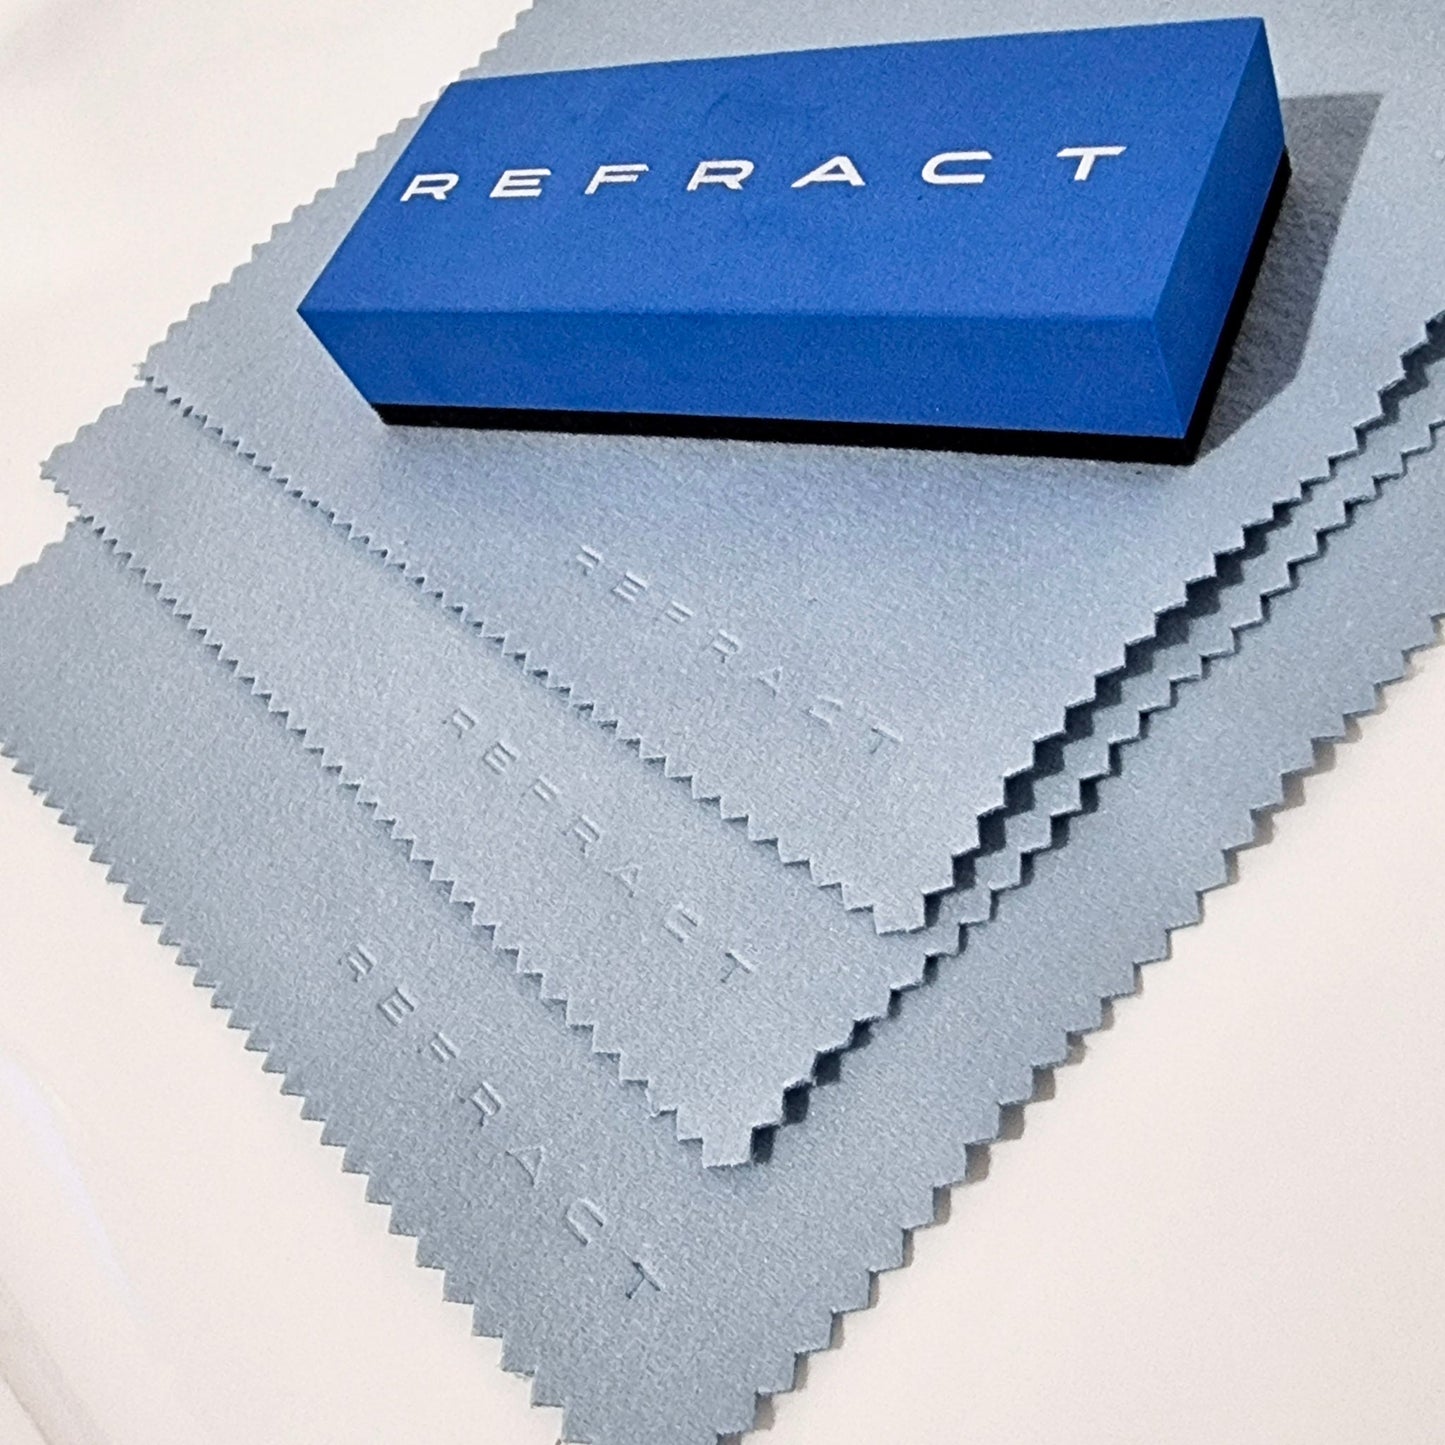 Refract Premium Car Care Products REFRACT Microfiber Suede Coating Applicator Towel Pack $12.95